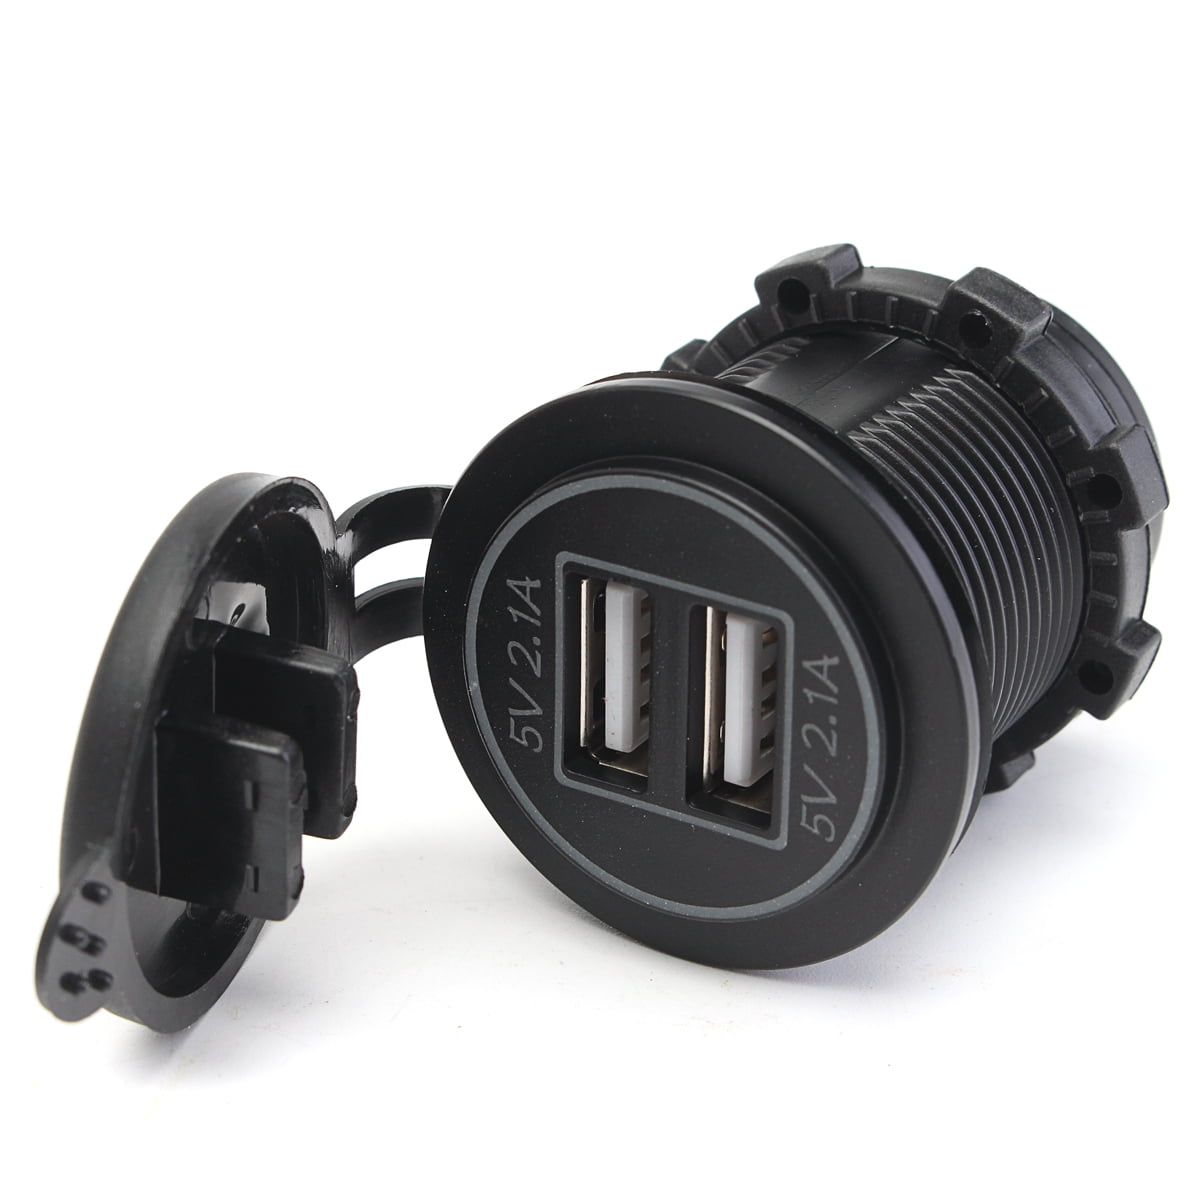 12-24V 2.1A+2.1A Waterproof Car Motorcycle Dual USB Power Adapter ...